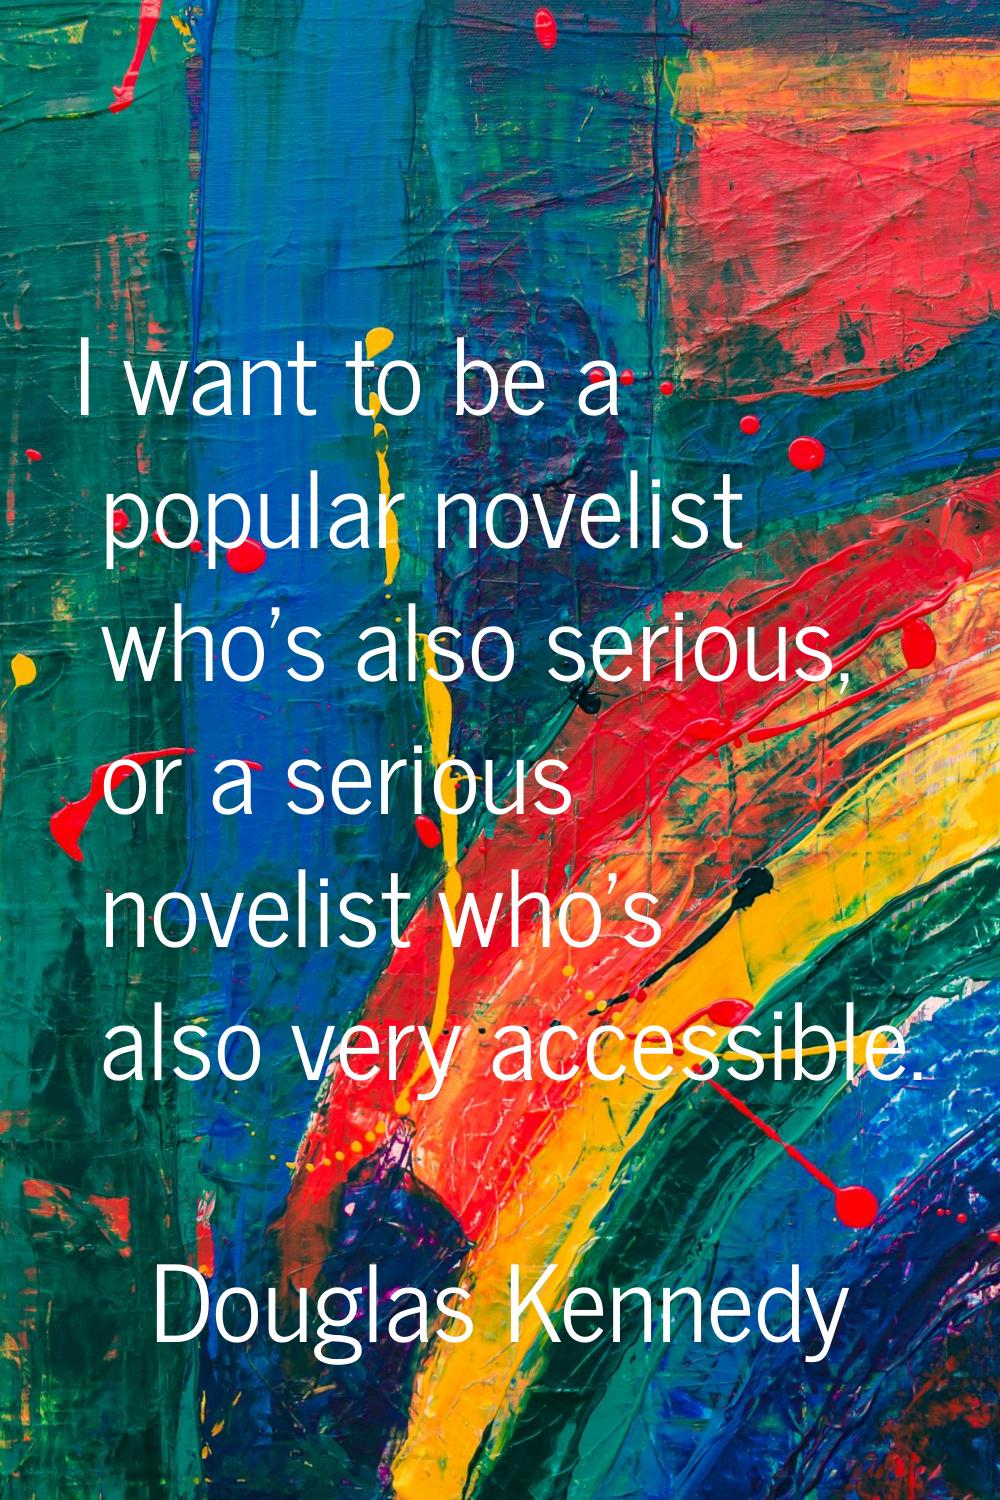 I want to be a popular novelist who's also serious, or a serious novelist who's also very accessibl